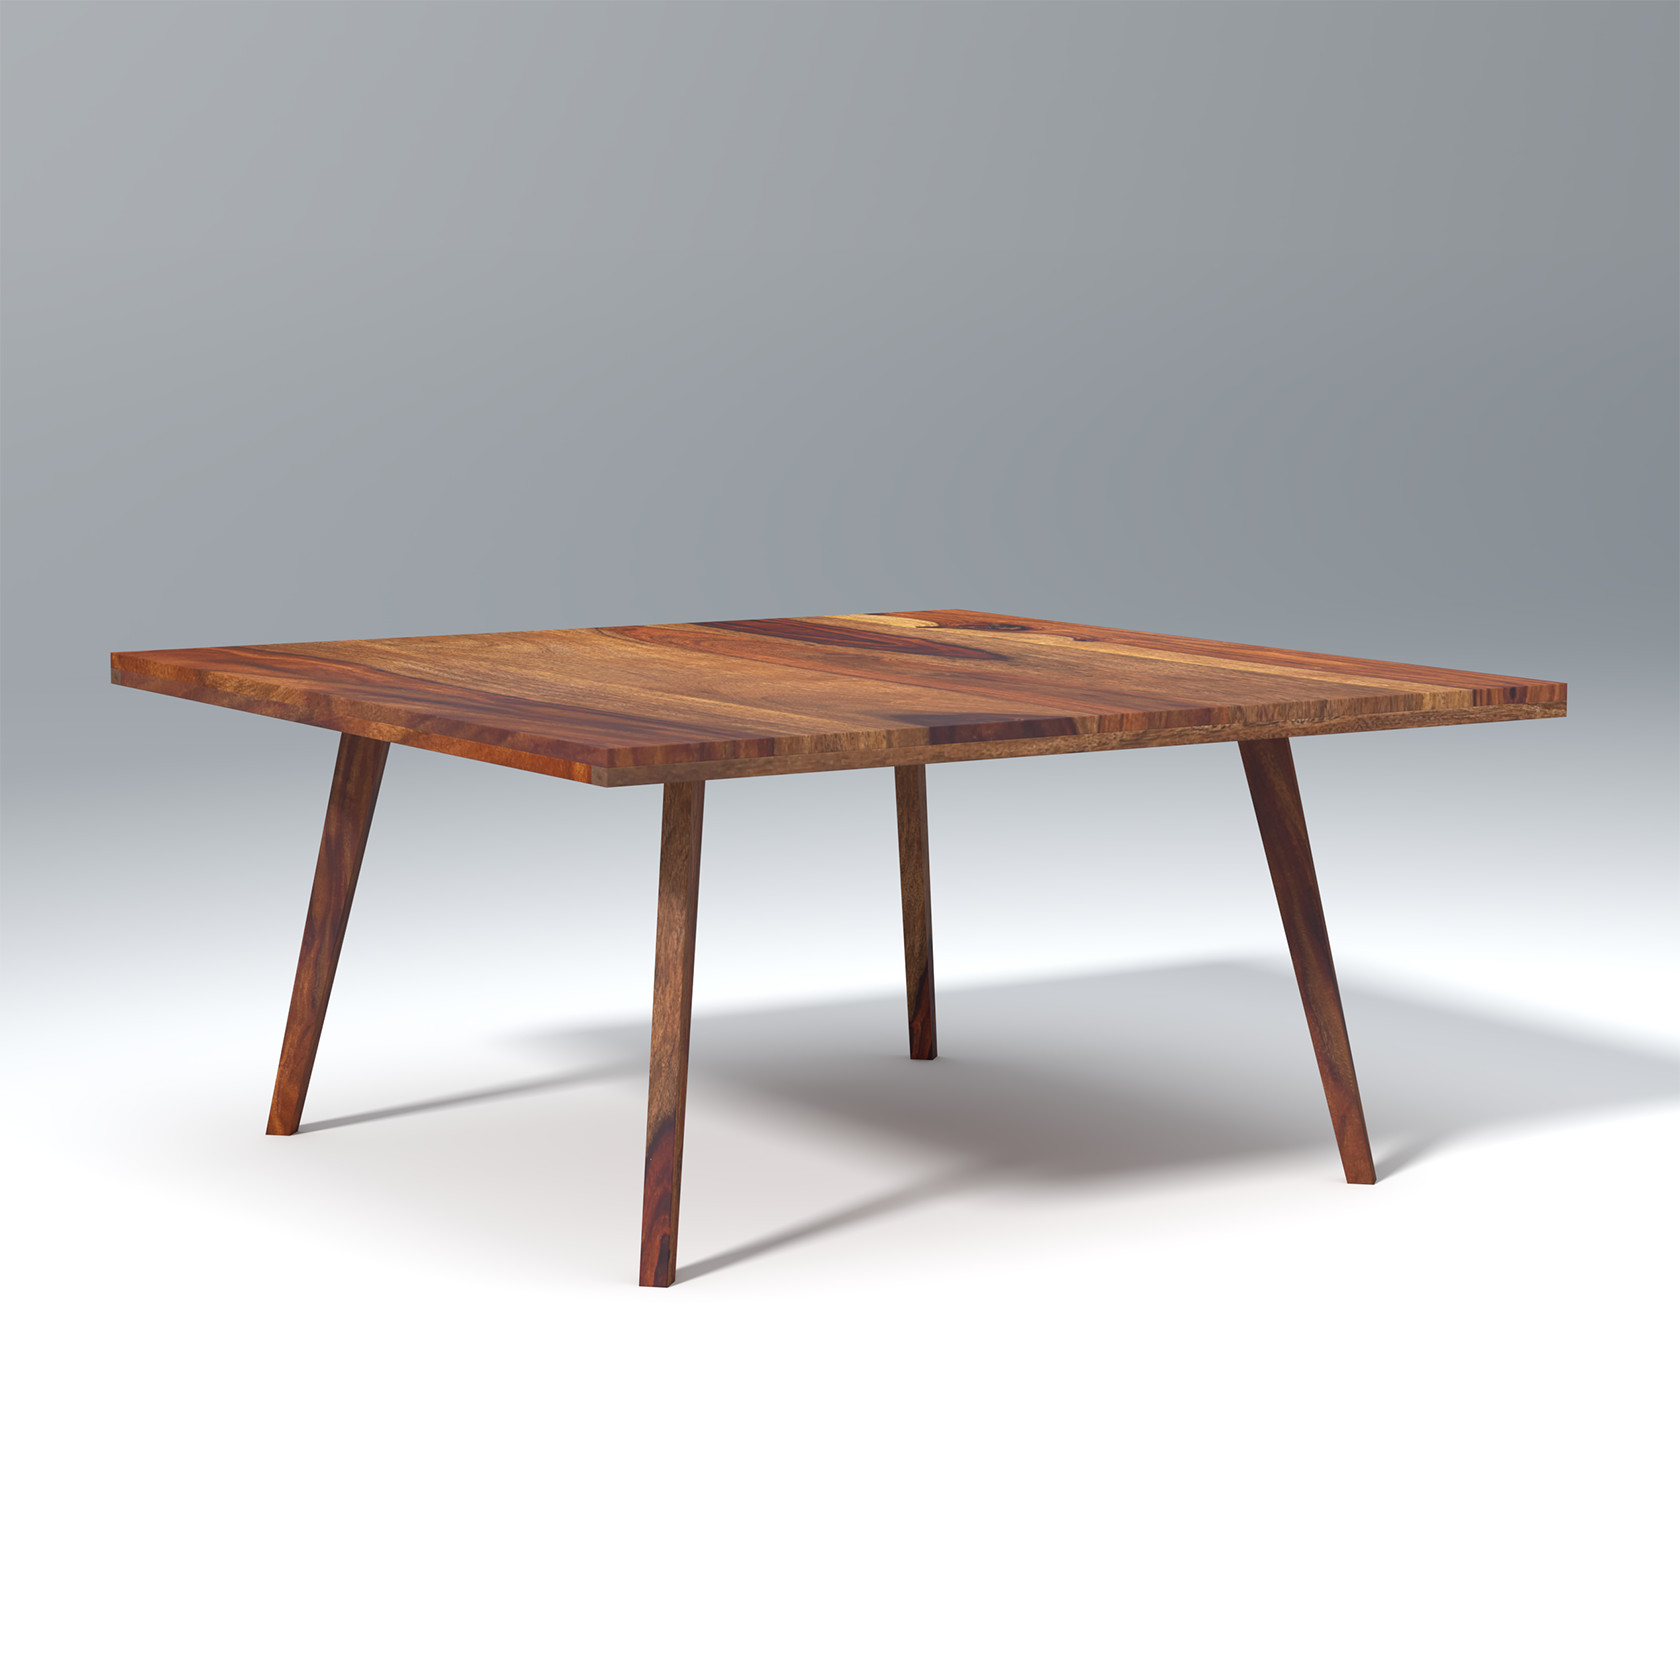 Resonance dining table In Reddish walnut color with 6 Seating